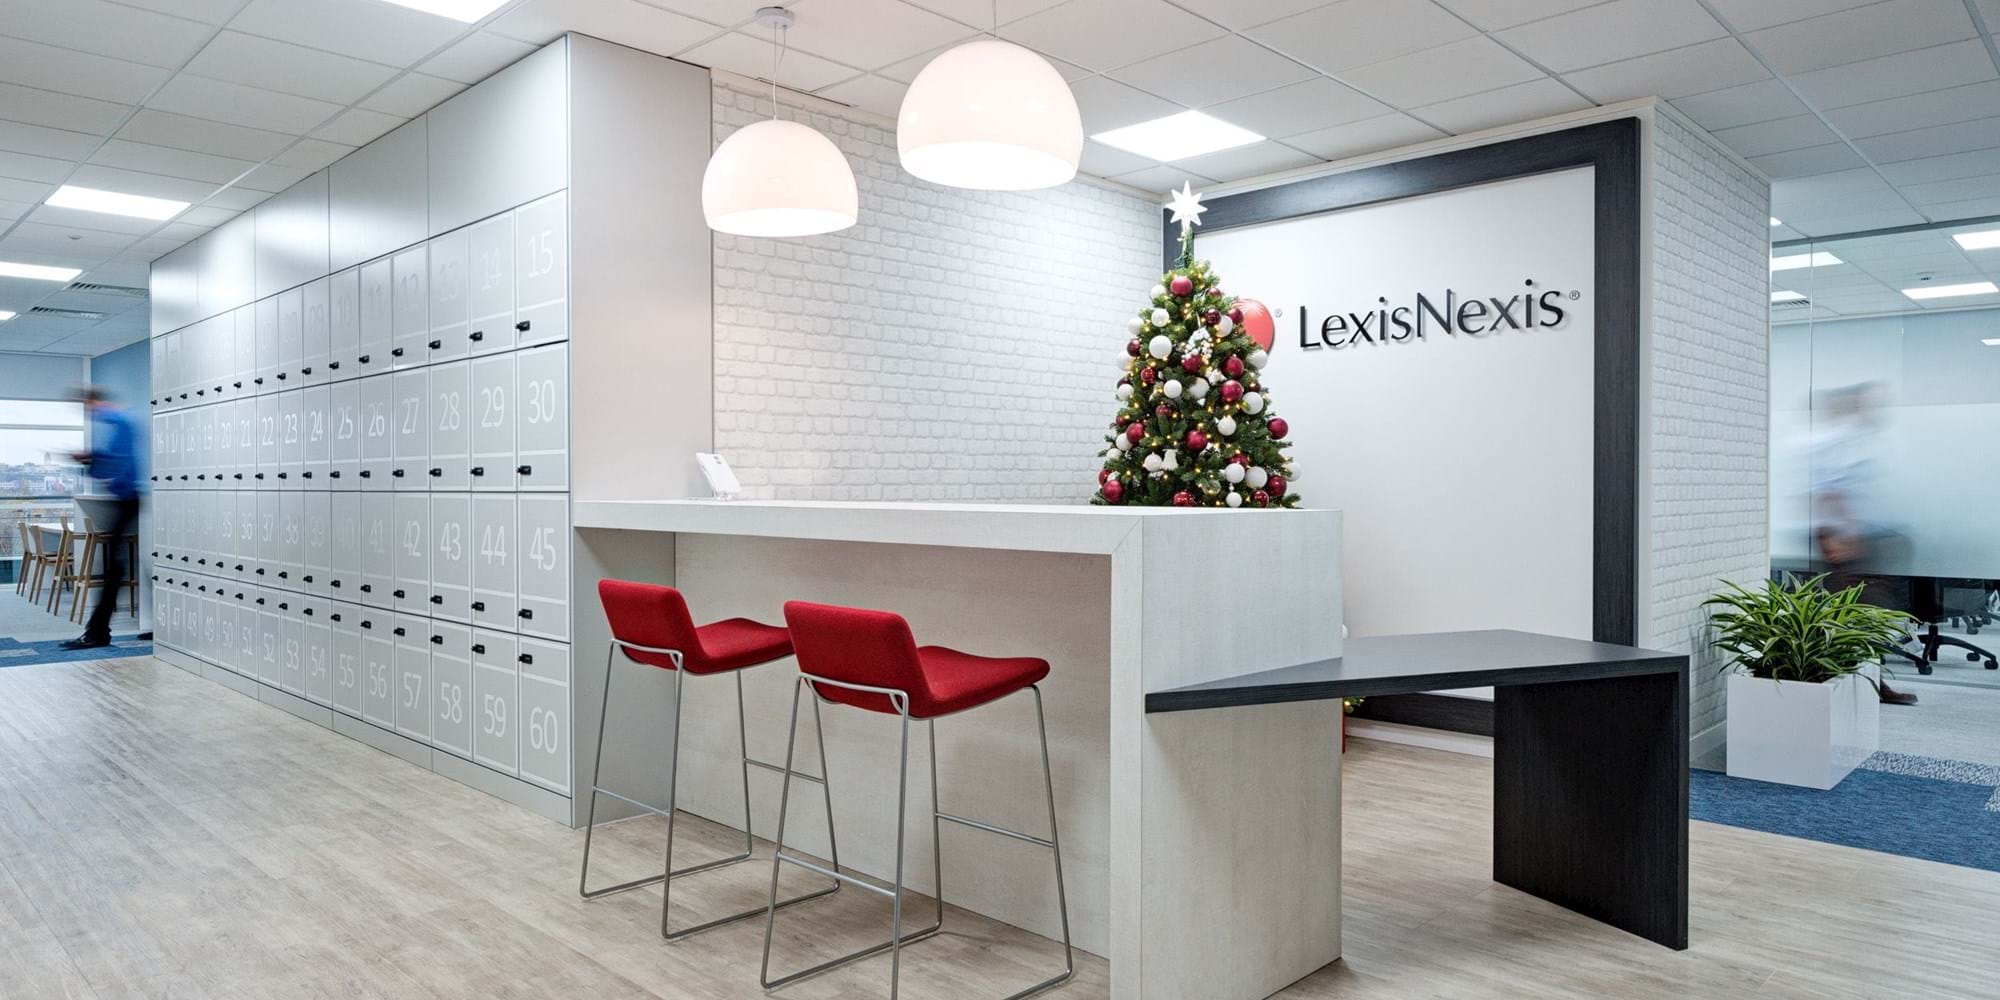 Modus Workspace office design, fit out and refurbishment - Lexis Nexis - Reception - Reed Elsevier Leeds 07 highres sRGB.jpg